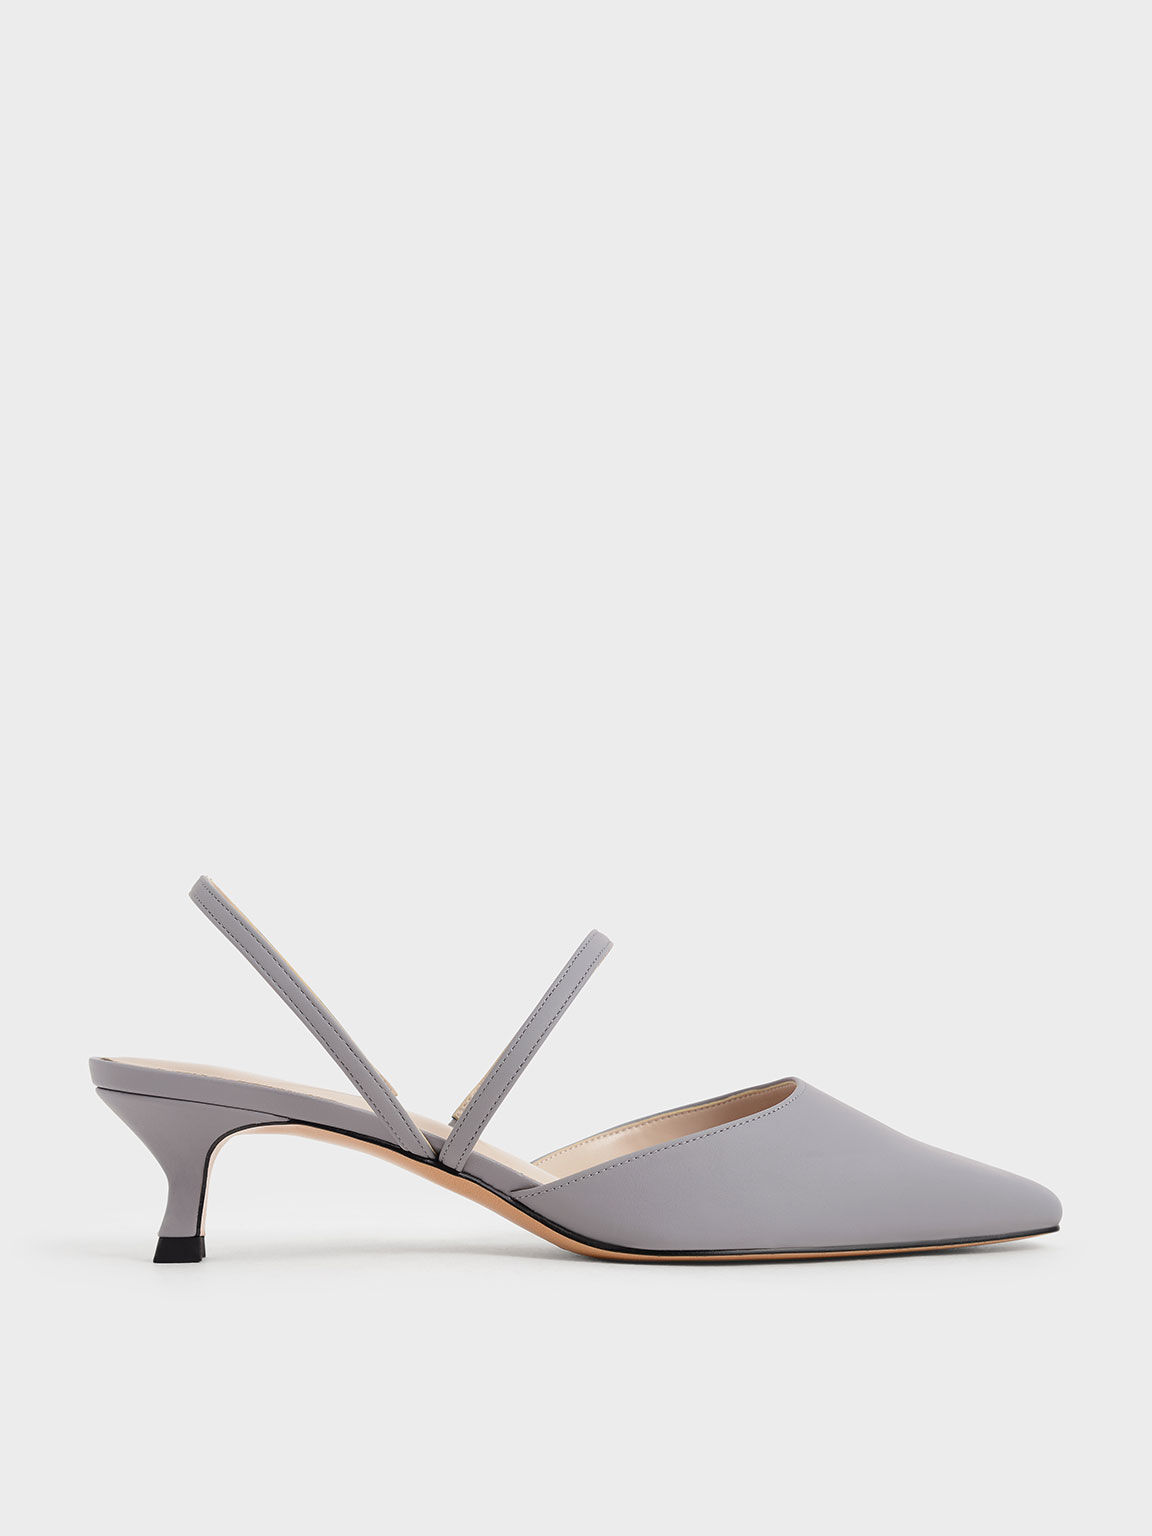 Black See-Through Trapeze Heel Slingback Pumps - CHARLES & KEITH BH